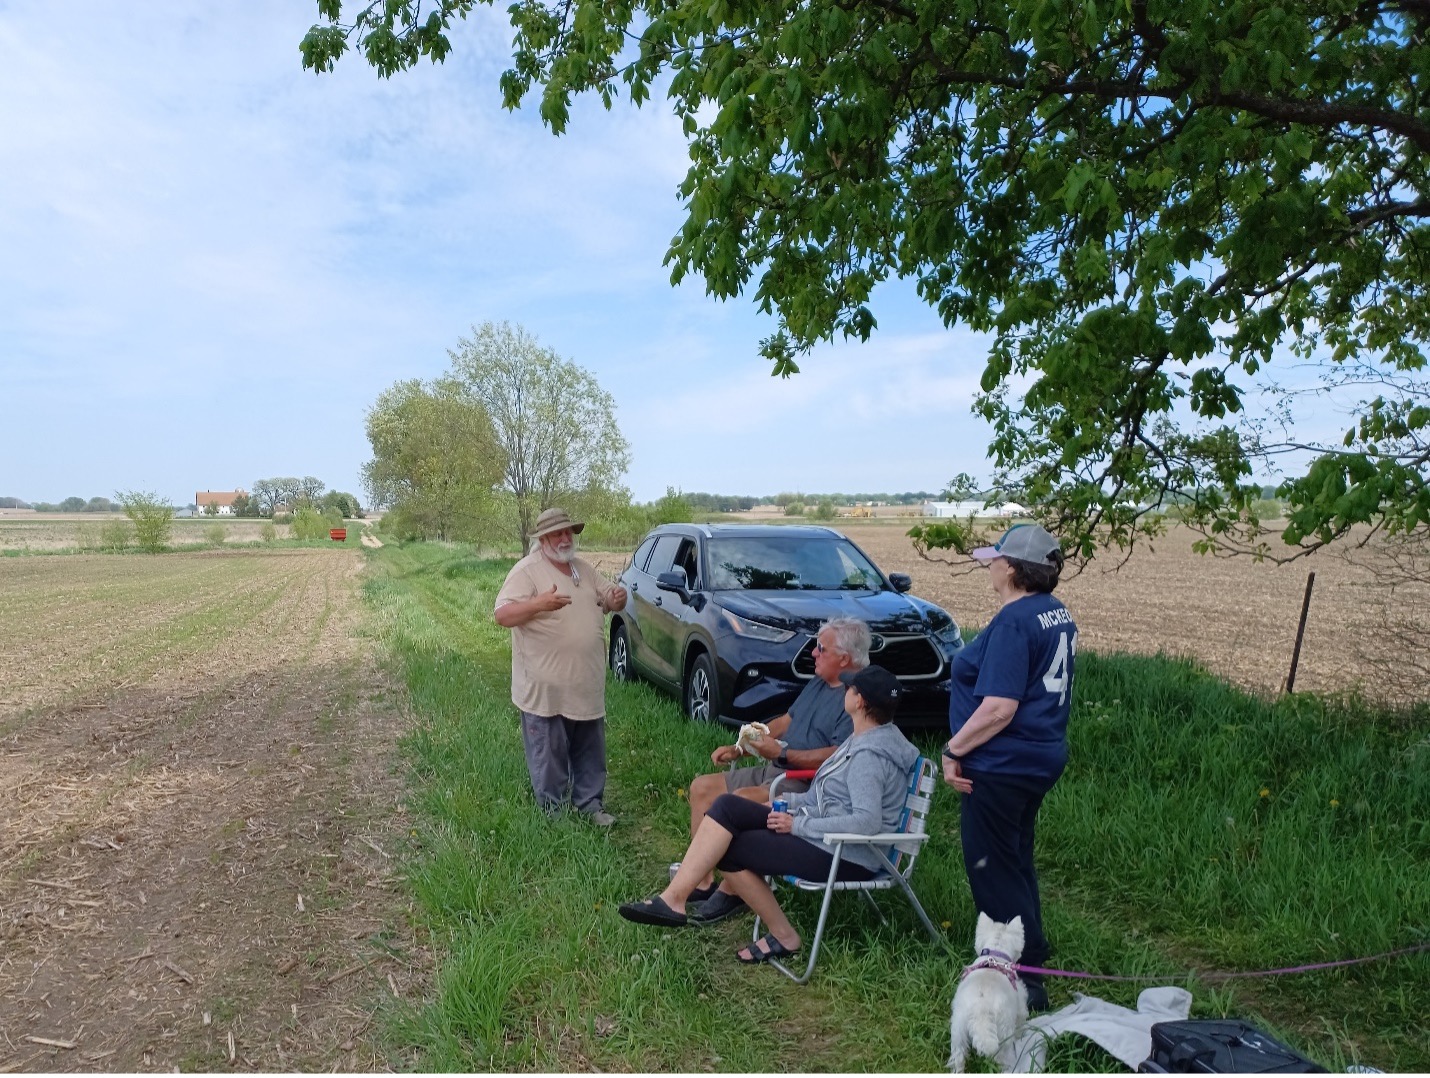 Dr. Bob McCullough (ISAS) talking with members of the McKeown family about the geophysics survey of the site. Photo credit: John Lambert.